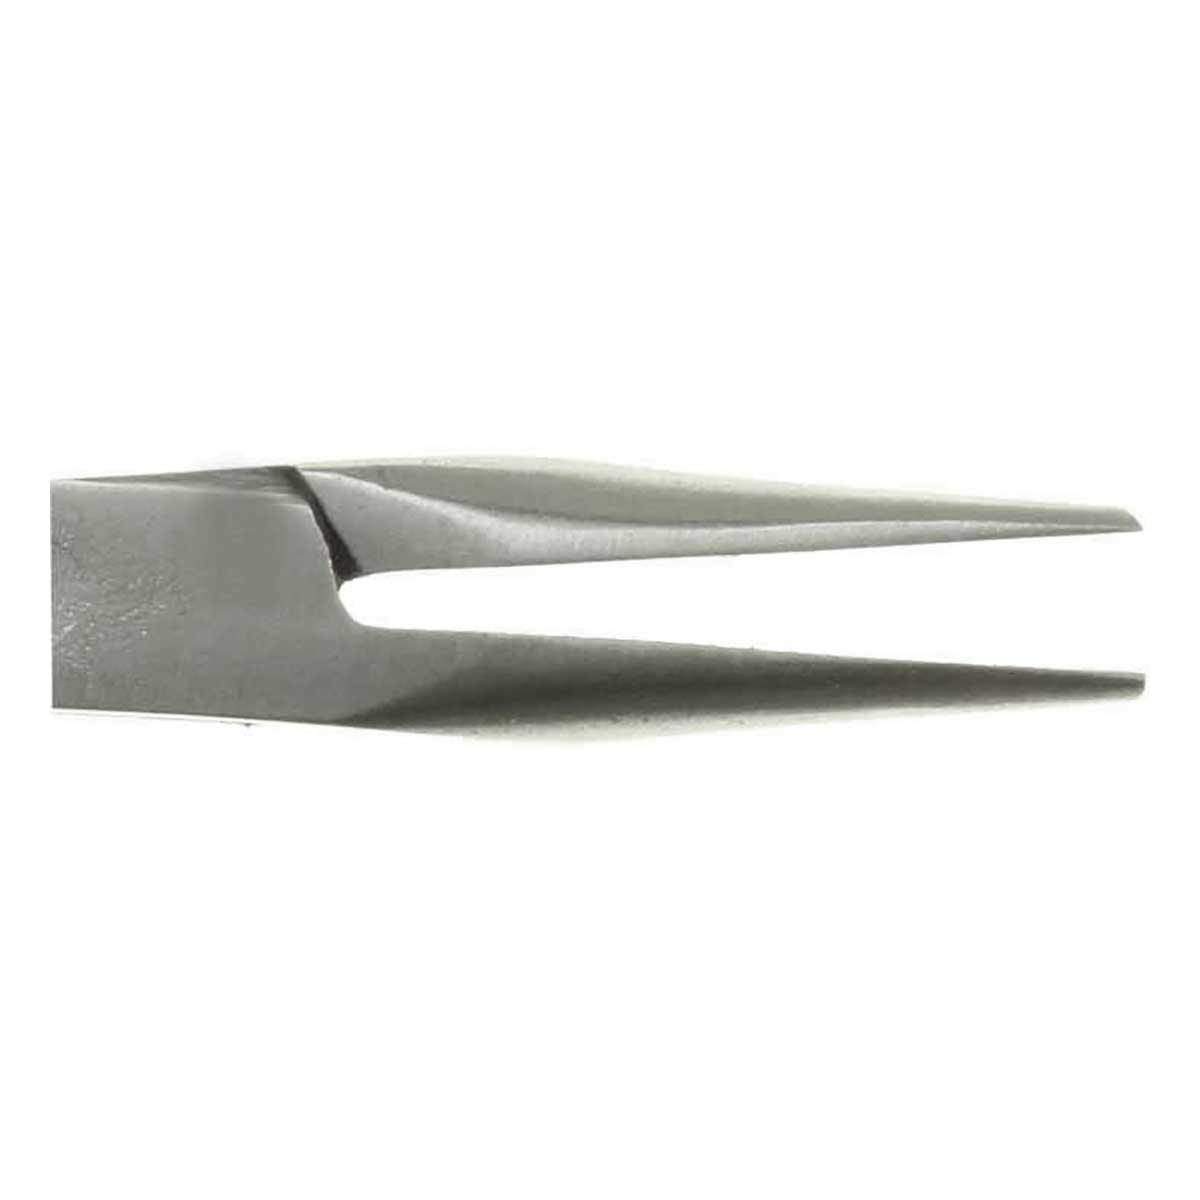 Needle Nose Pliers - 5 inch